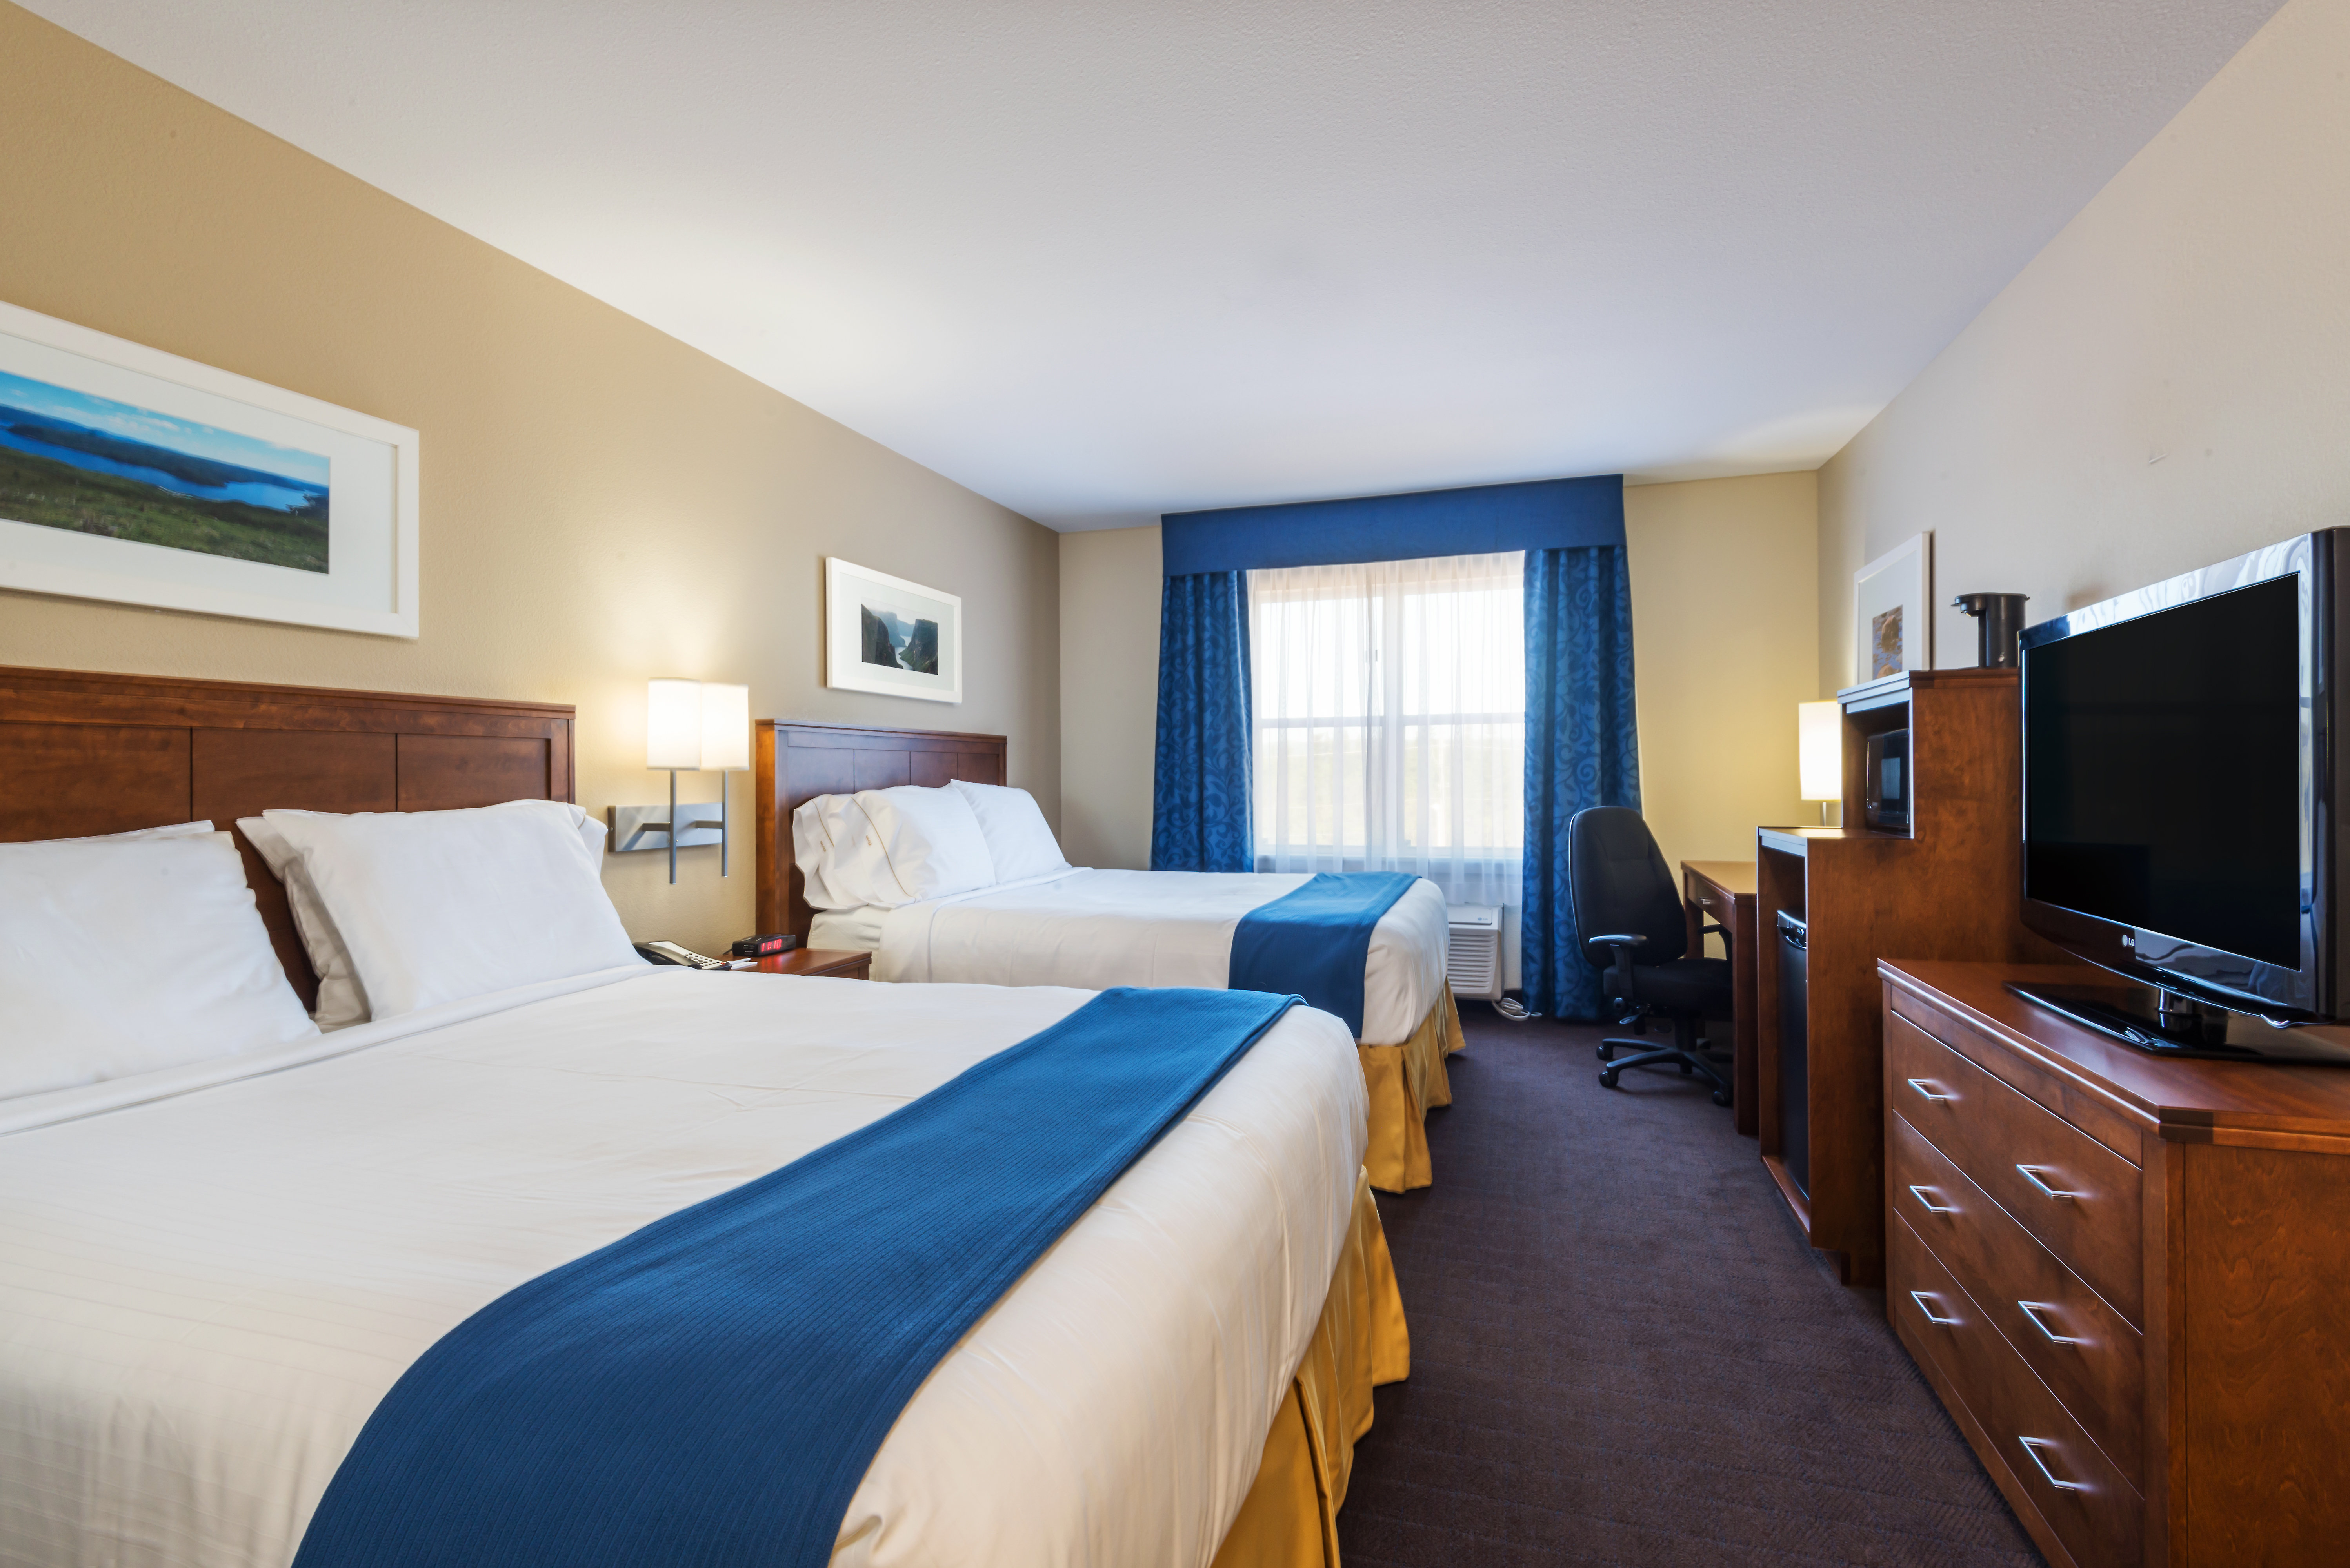 Enjoy a mini-refrigerator and microwave in our Two Queen Bed Rooms